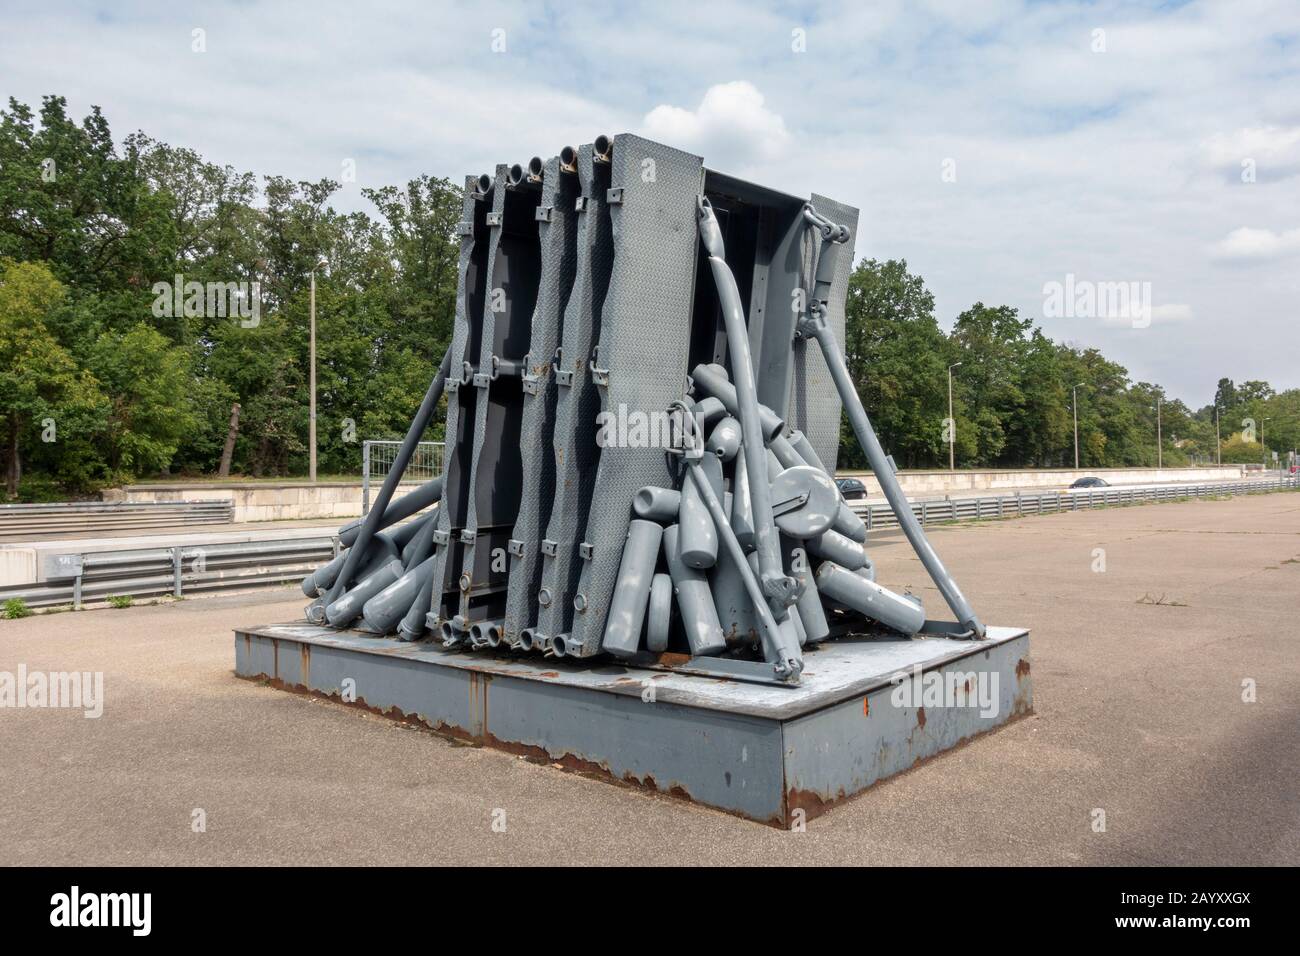 Sculpture behind the main grandstand at the Nazi Party rally grounds, Nuremberg, Germany. Stock Photo